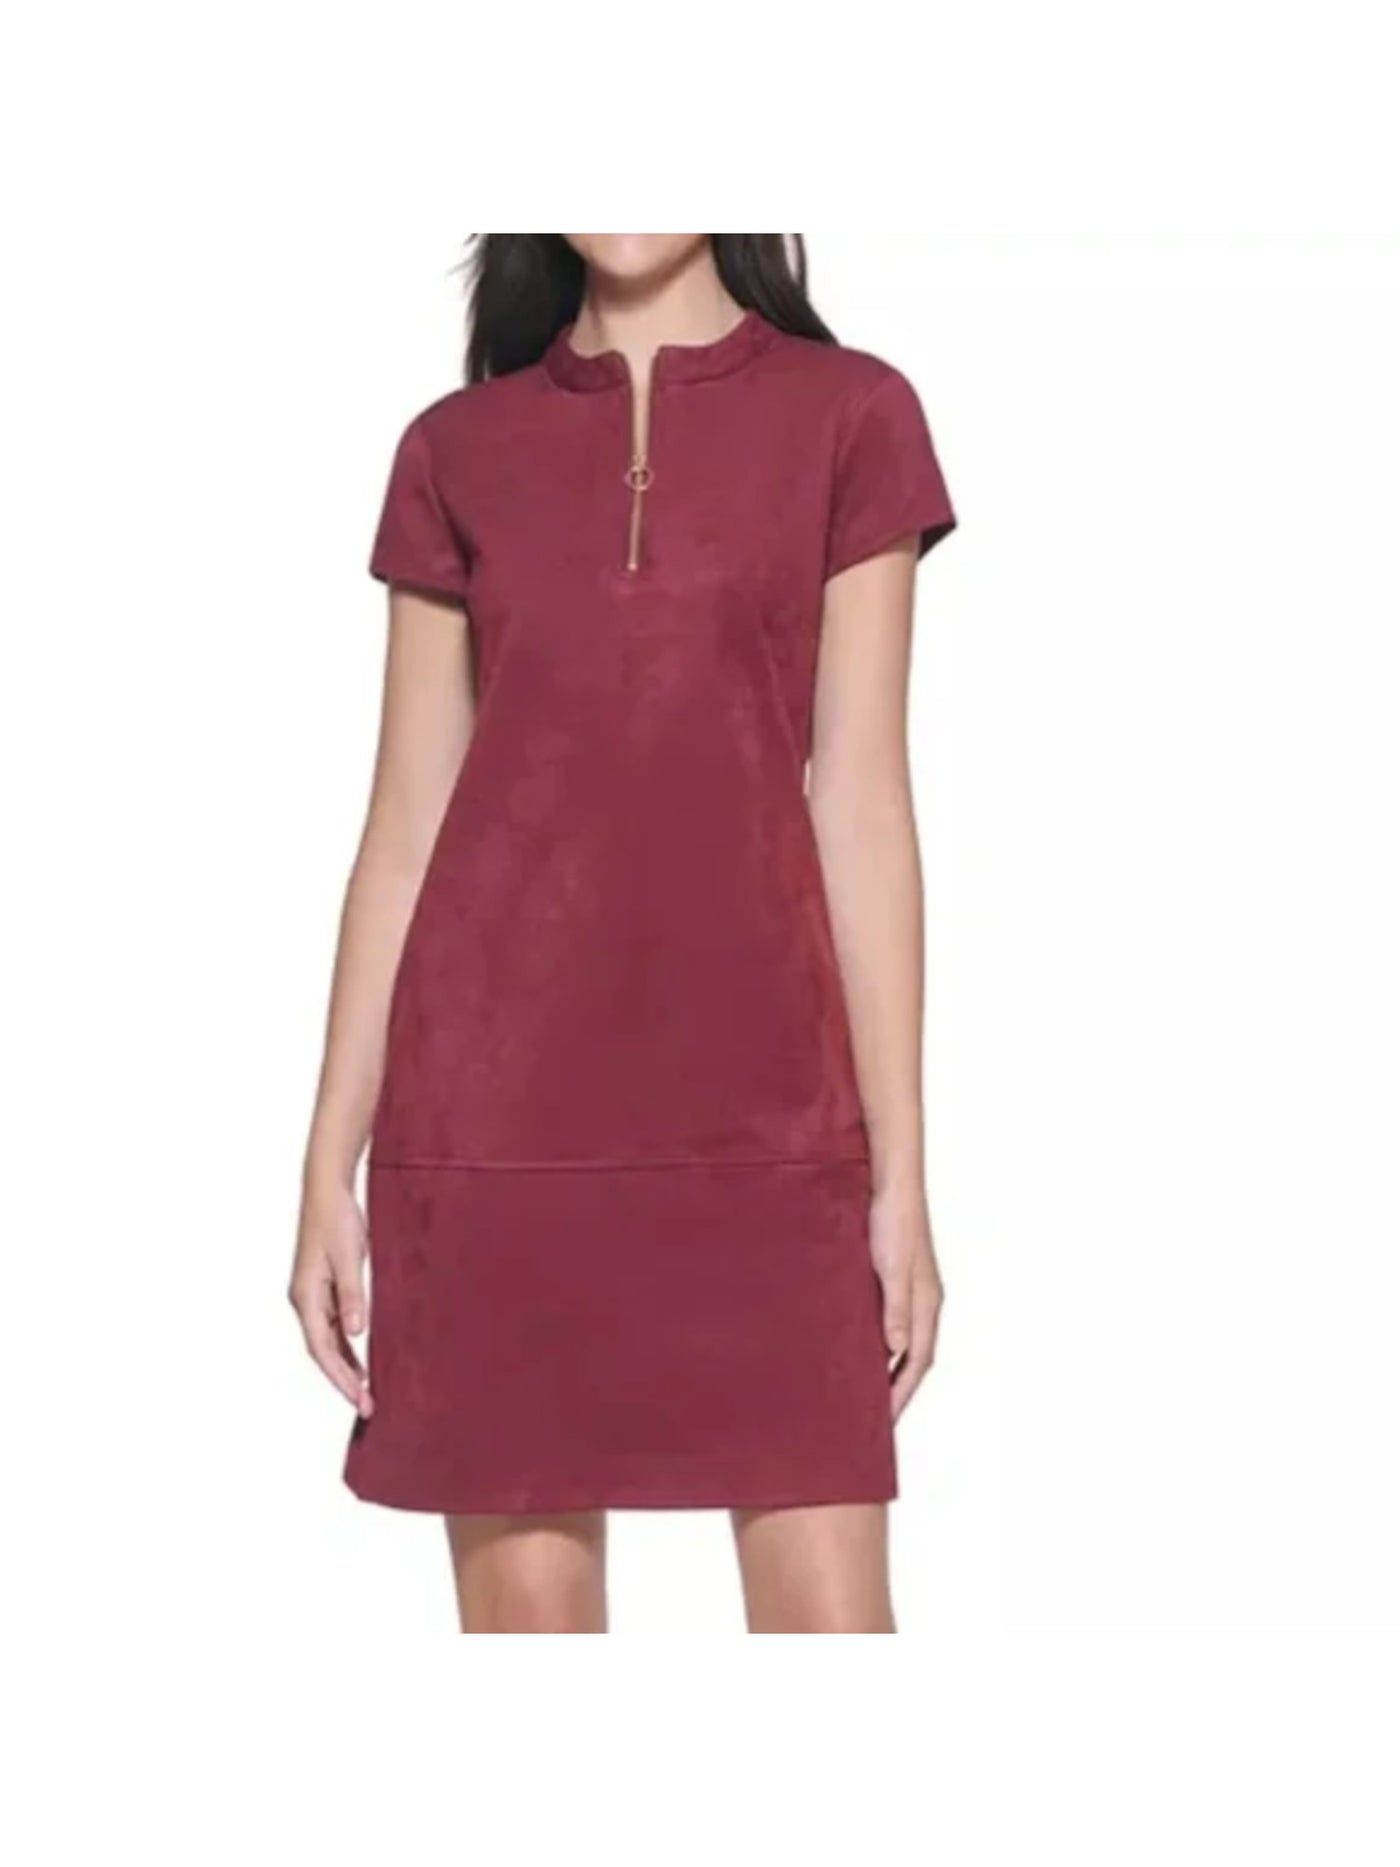 KENSIE Womens Zippered Pocketed Short Sleeve Round Neck Above The Knee Party Shift Dress